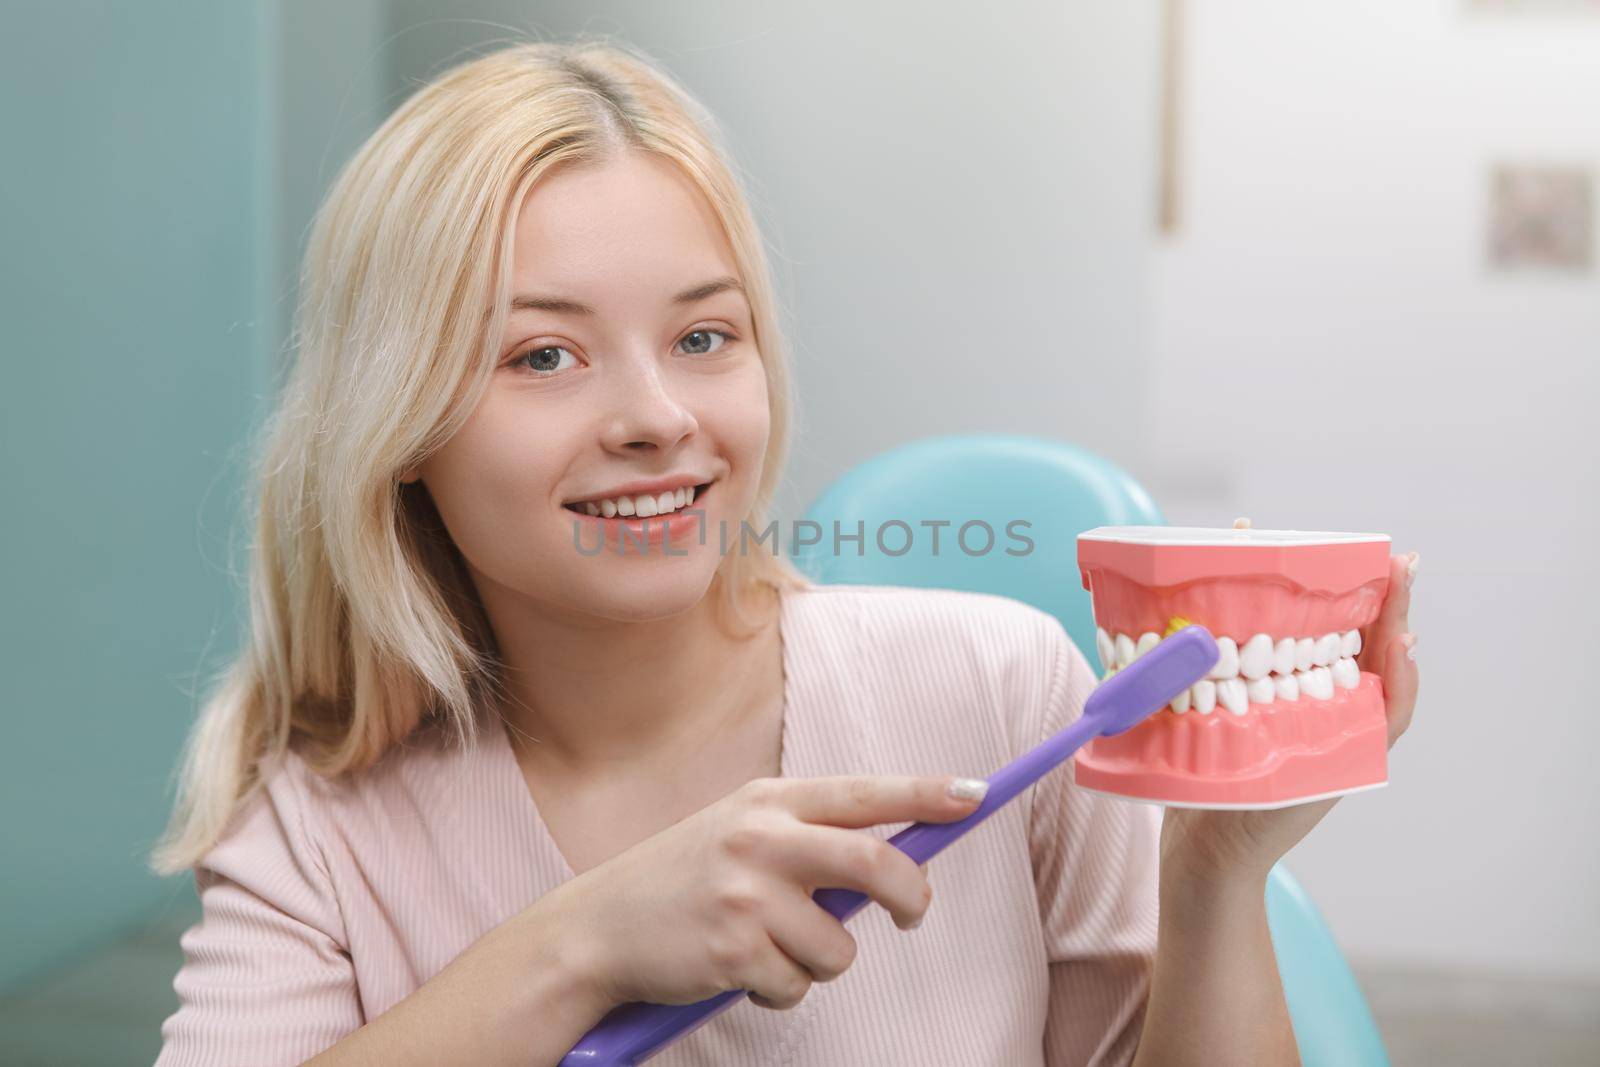 Cheerful young woman smiling to the camera while showing how to brush teeth correctly on a jaw model